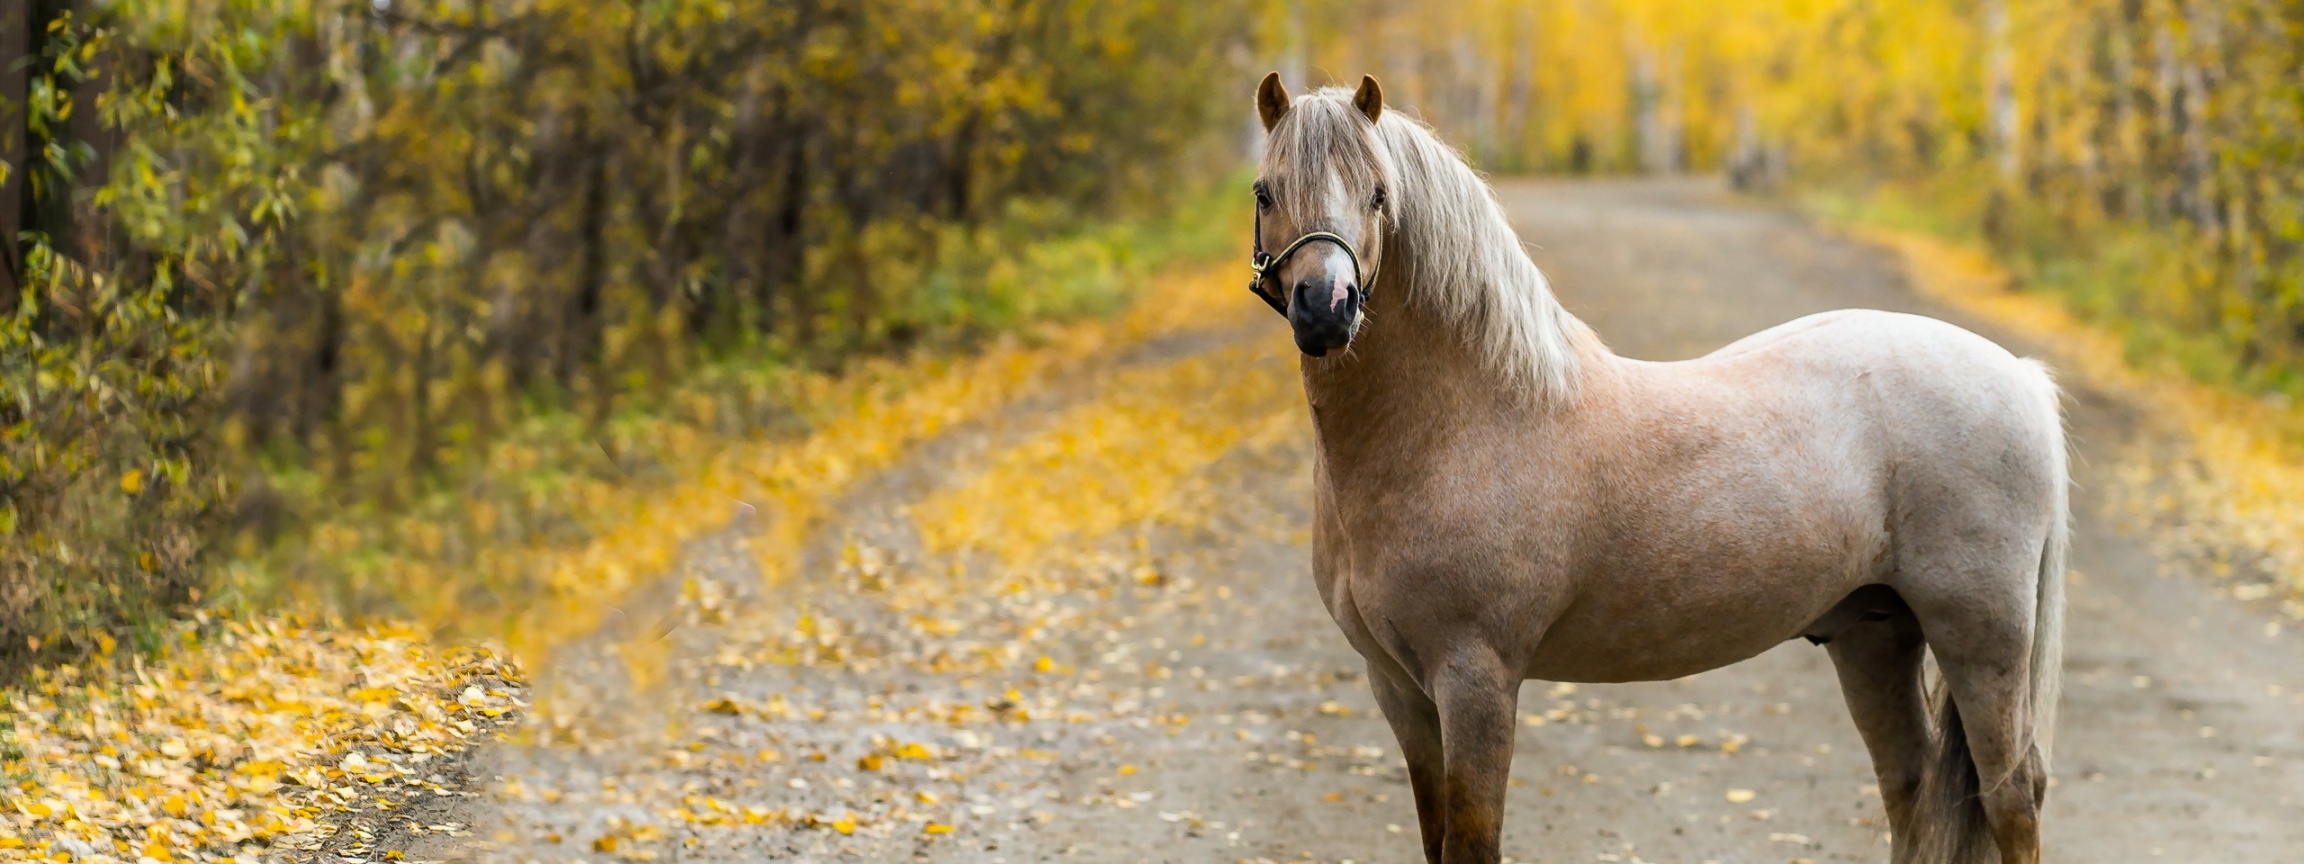 The Horse On The Road In The Fall